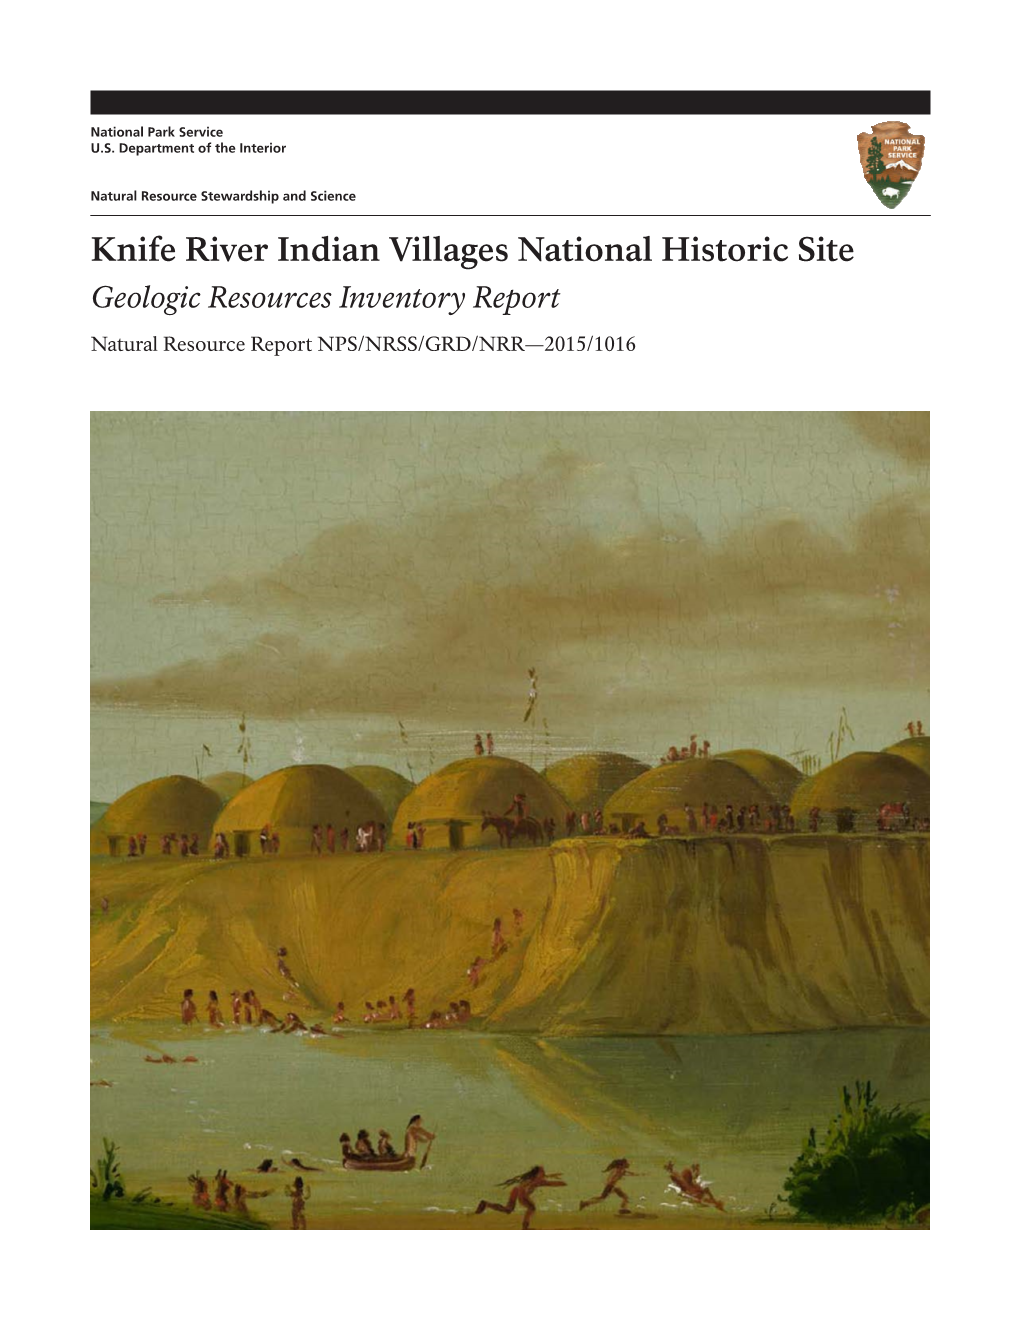 Knife River Indian Villages National Historic Site Geologic Resources Inventory Report